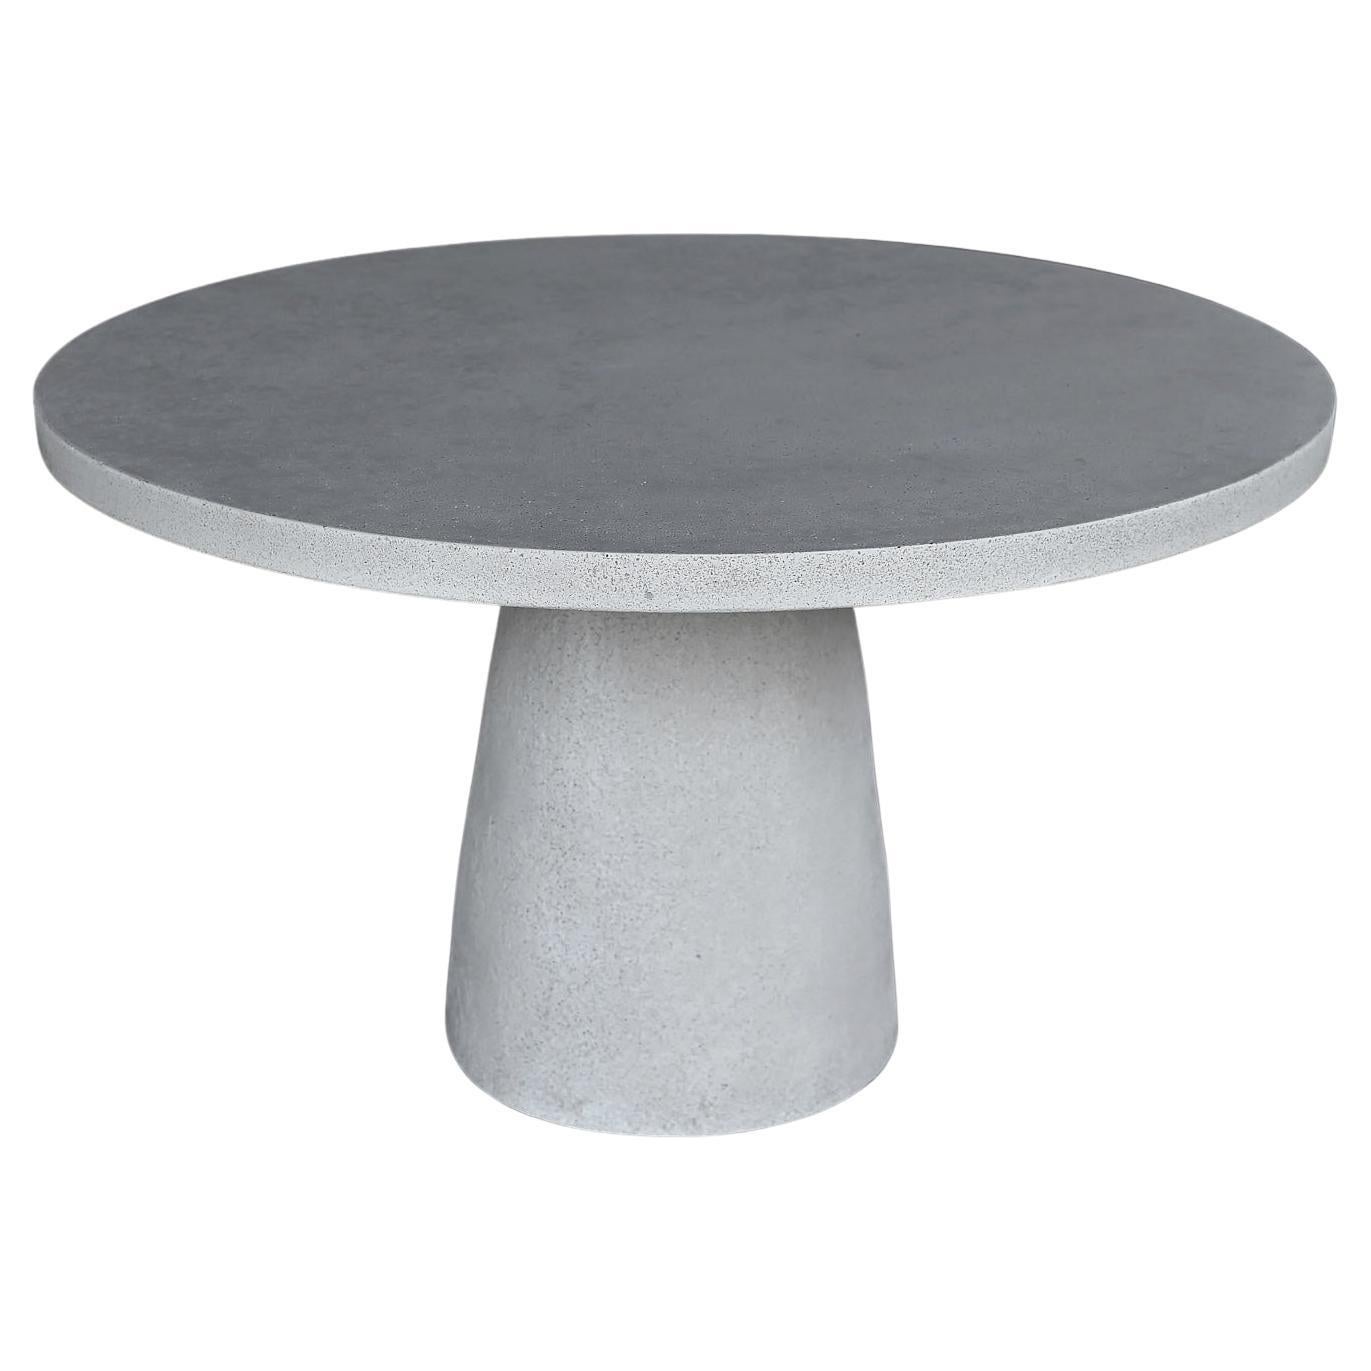 Cast Resin 'Hive' Dining Table, White Stone Finish by Zachary A. Design For Sale